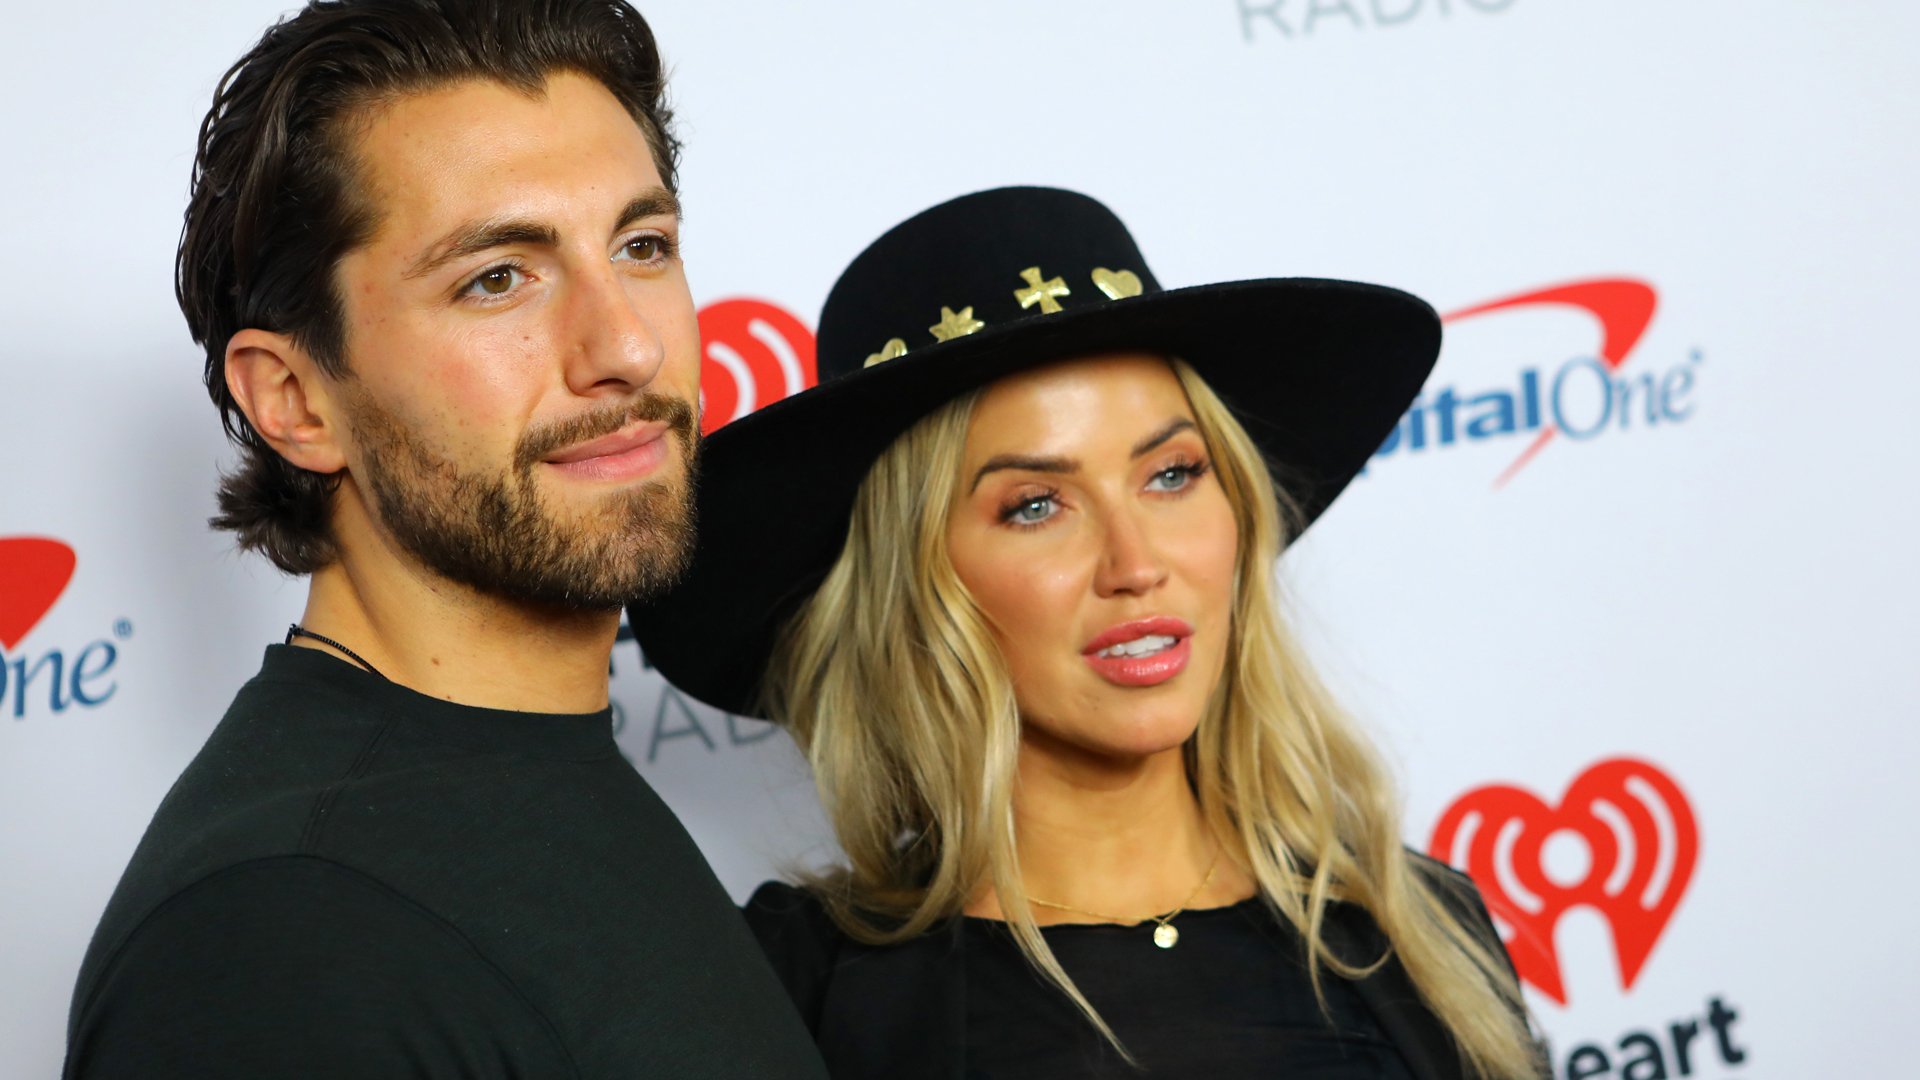 Bachelor Nation stars Jason Tartick and Kaitlyn Bristowe attend iHeartRadio ALTer EGO presented by Capital One at The Forum on January 18, 2020 in Inglewood, California.